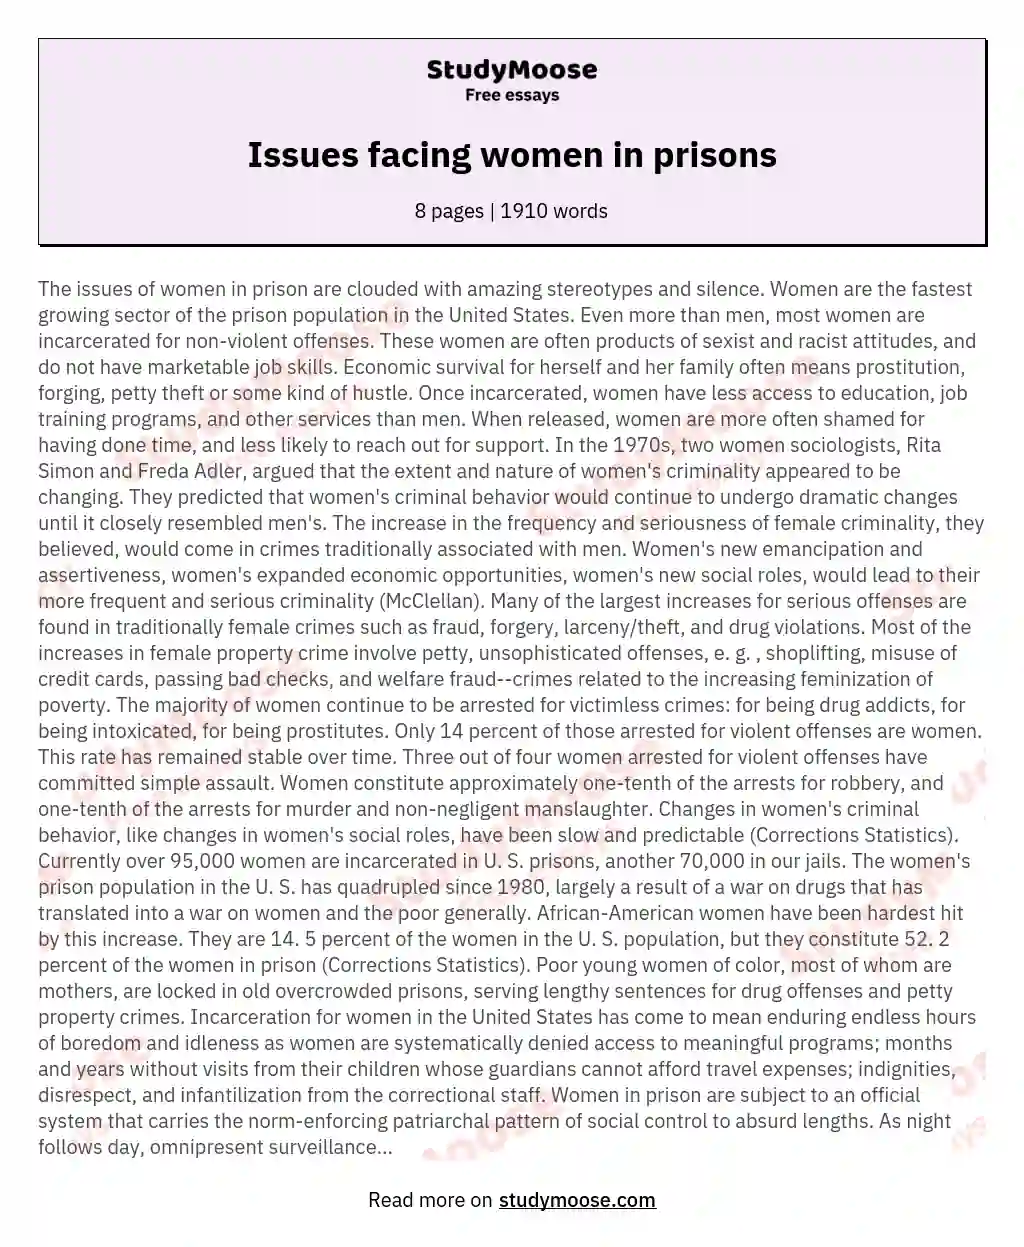 Issues facing women in prisons essay